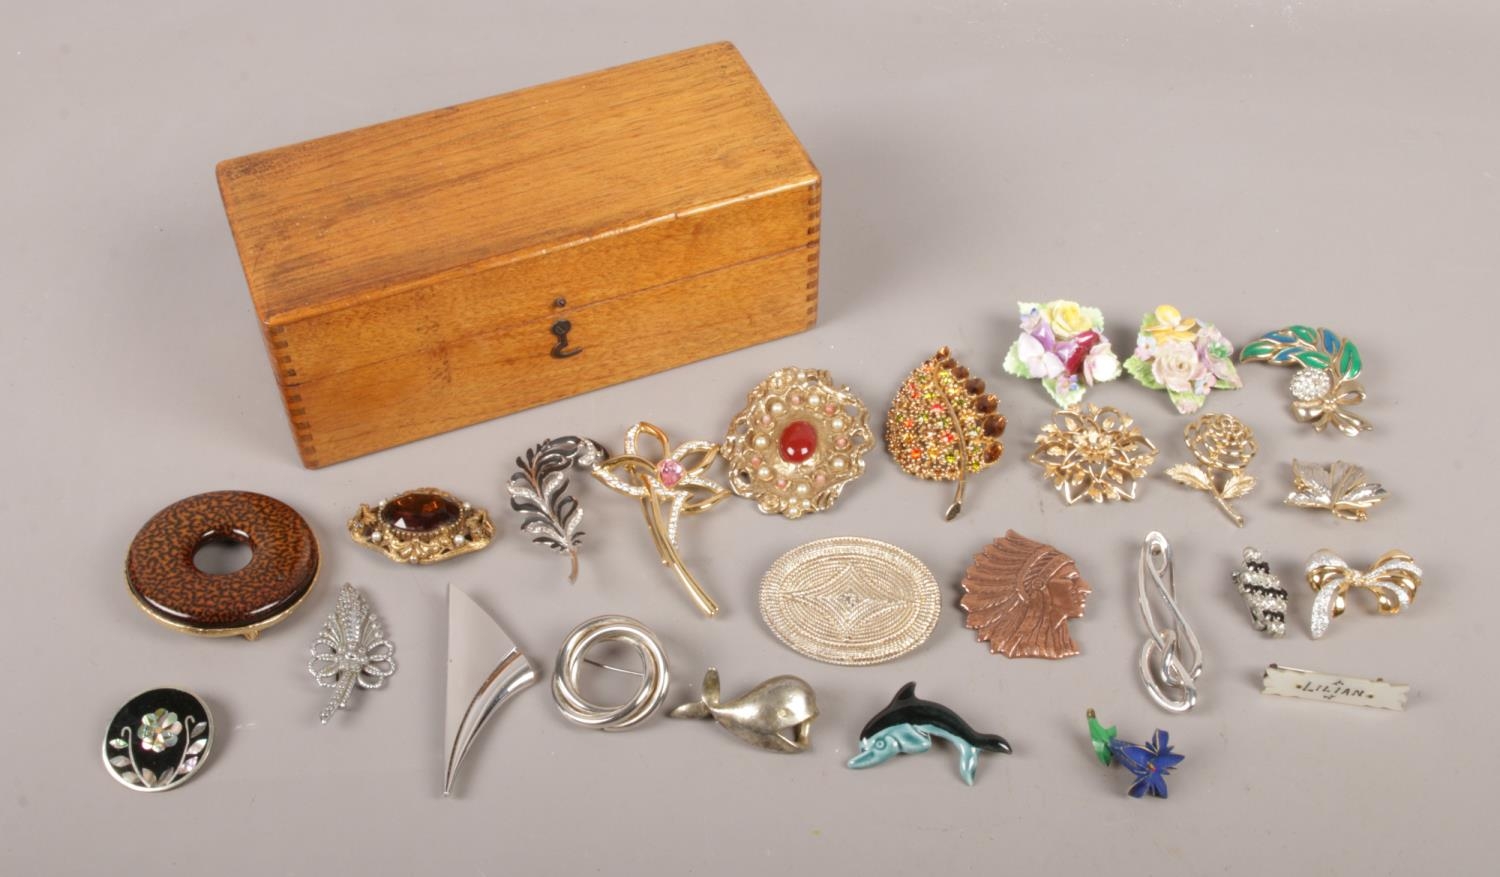 A small wooden box containing twenty five costume brooches.